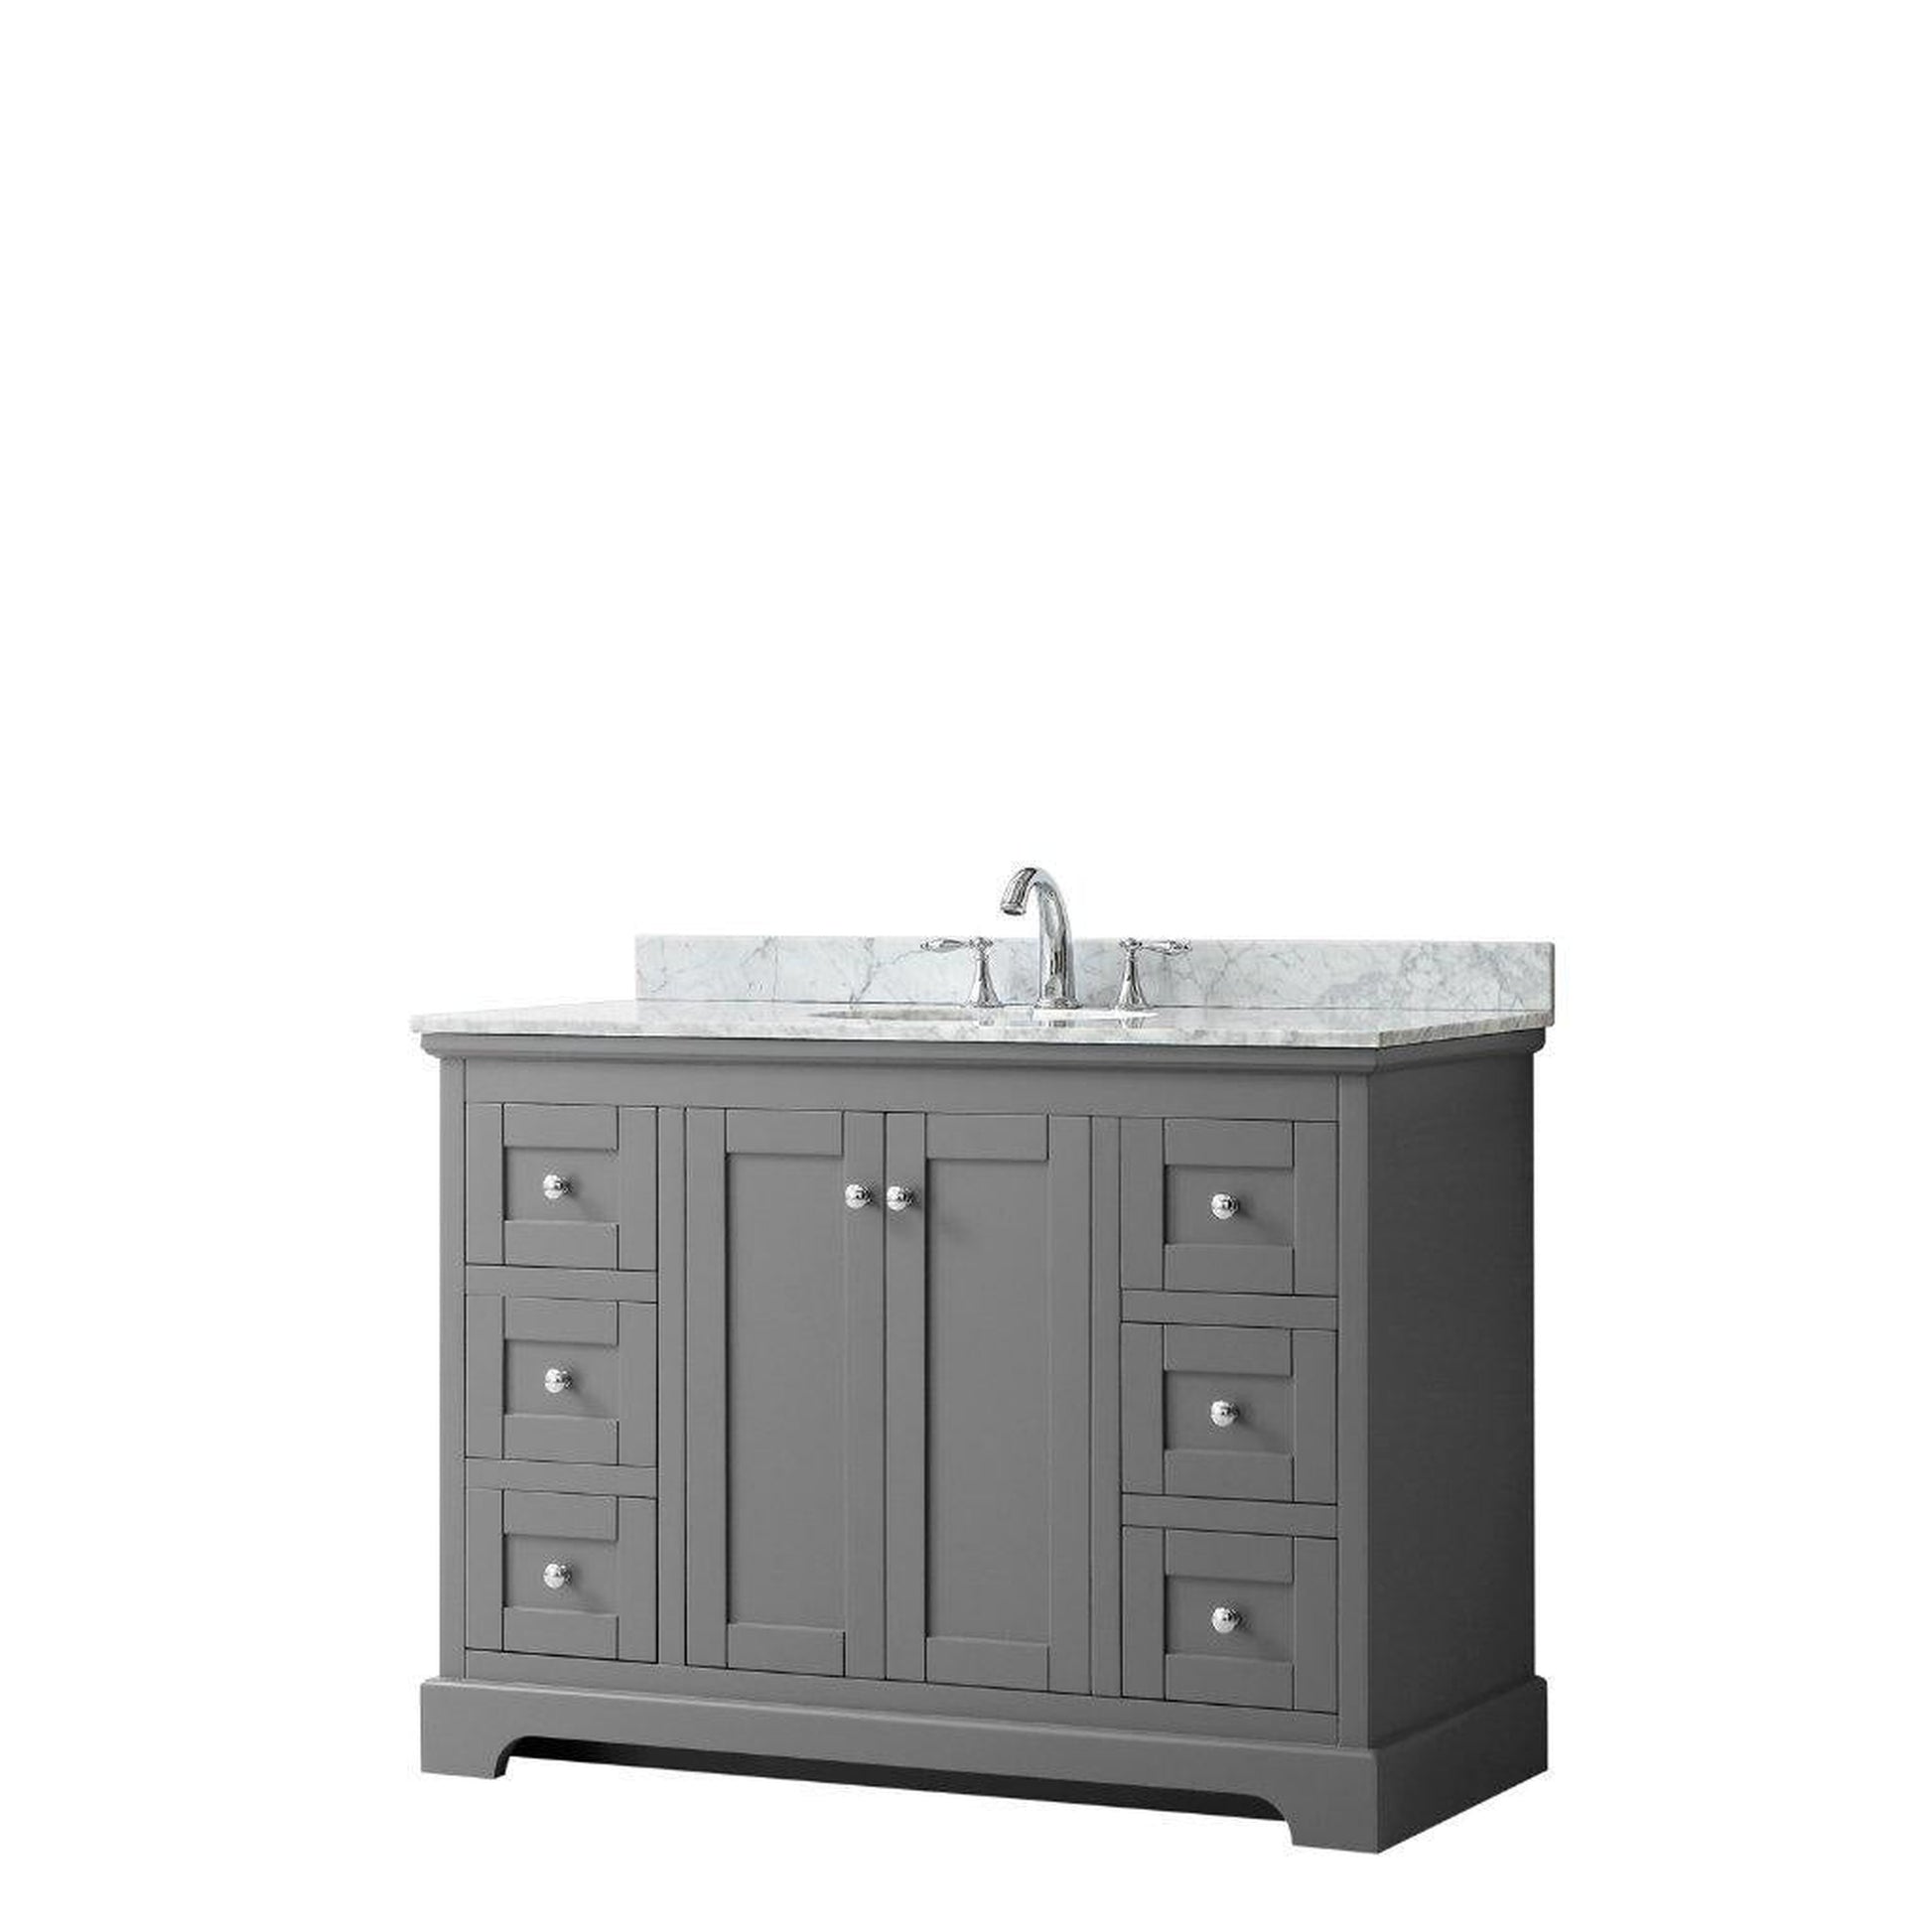 Wyndham Collection Avery 48" Dark Gray Single Bathroom Vanity With White Carrara Marble Countertop With 3-Hole Faucet And 8" Oval Sink